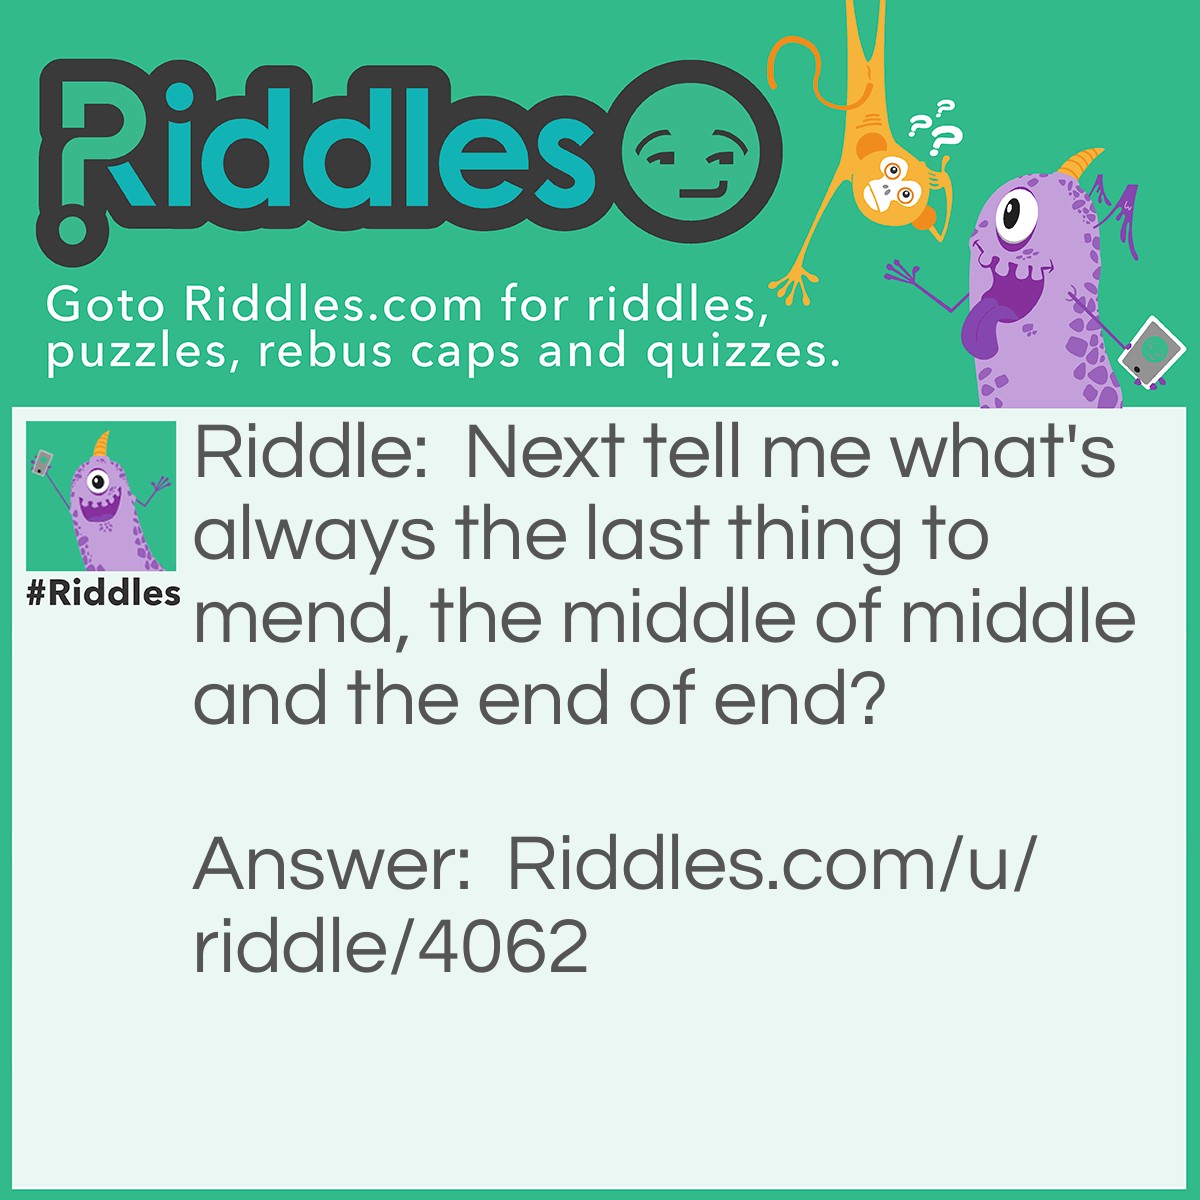 Riddle: Next tell me what's always the last thing to mend, the middle of middle and the end of end? Answer: D.